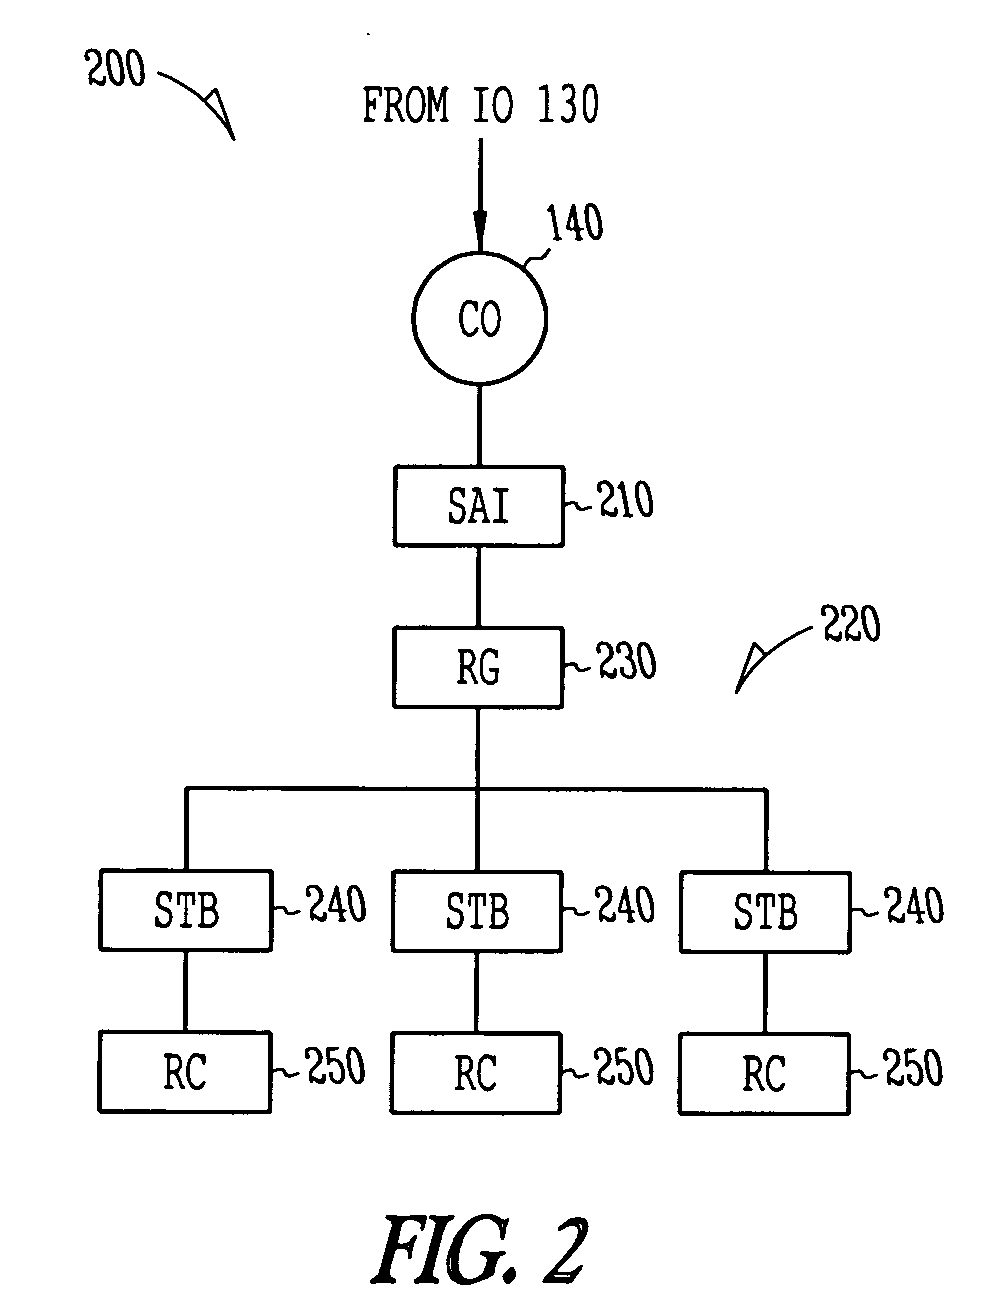 System and method for placement of servers in an internet protocol television network